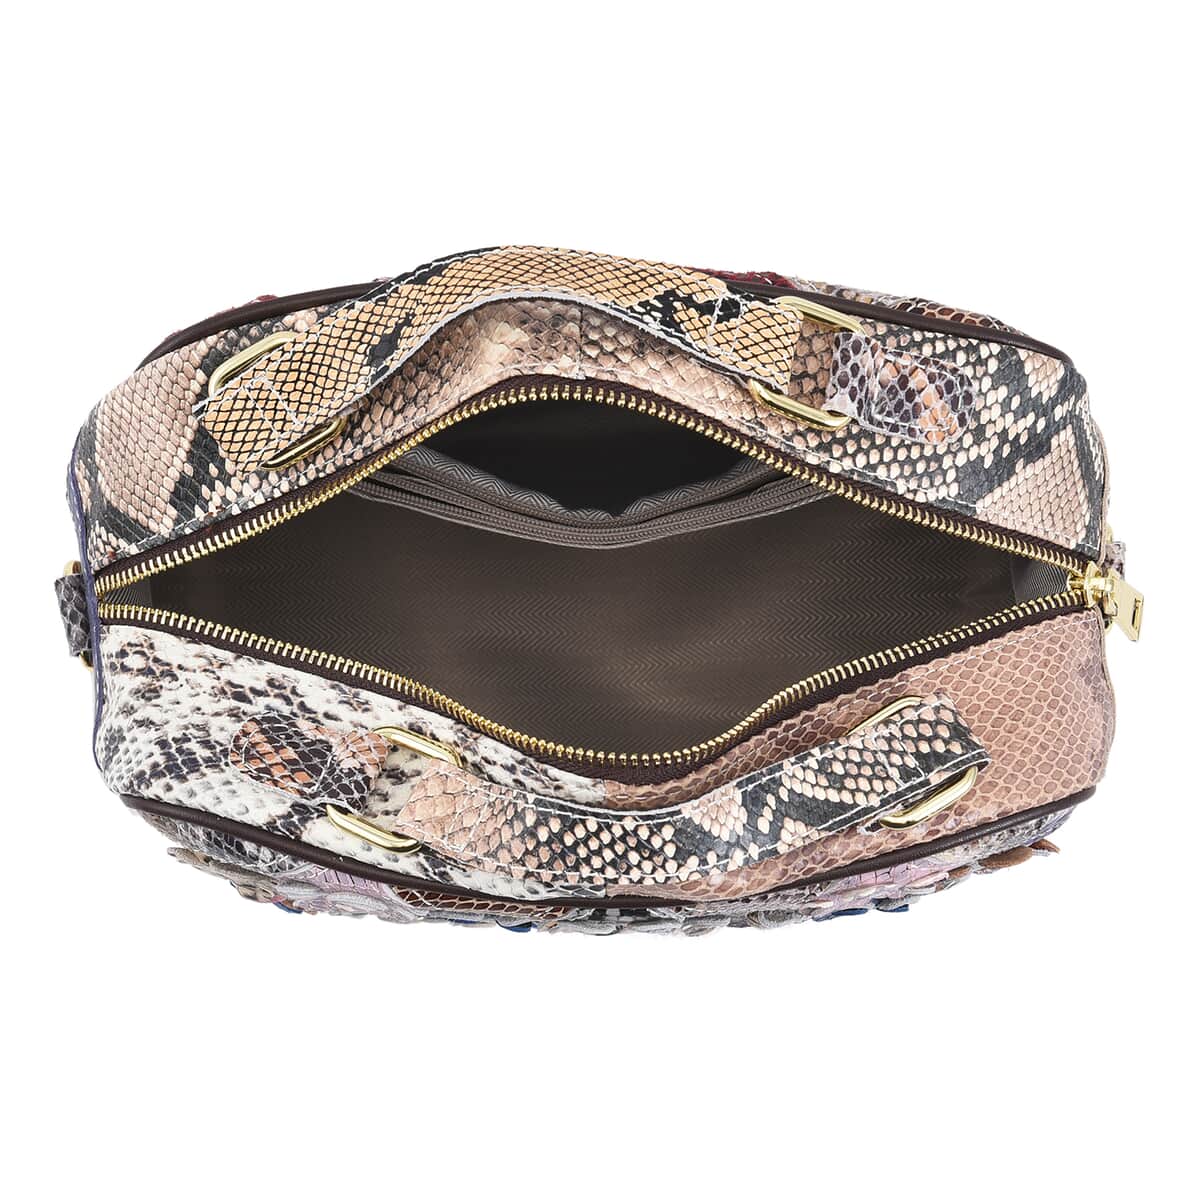 CHAOS By Elsie Rainbow Color Leopard and Snake Print Genuine Leather Crossbody Bag with Shoulder Strap image number 5